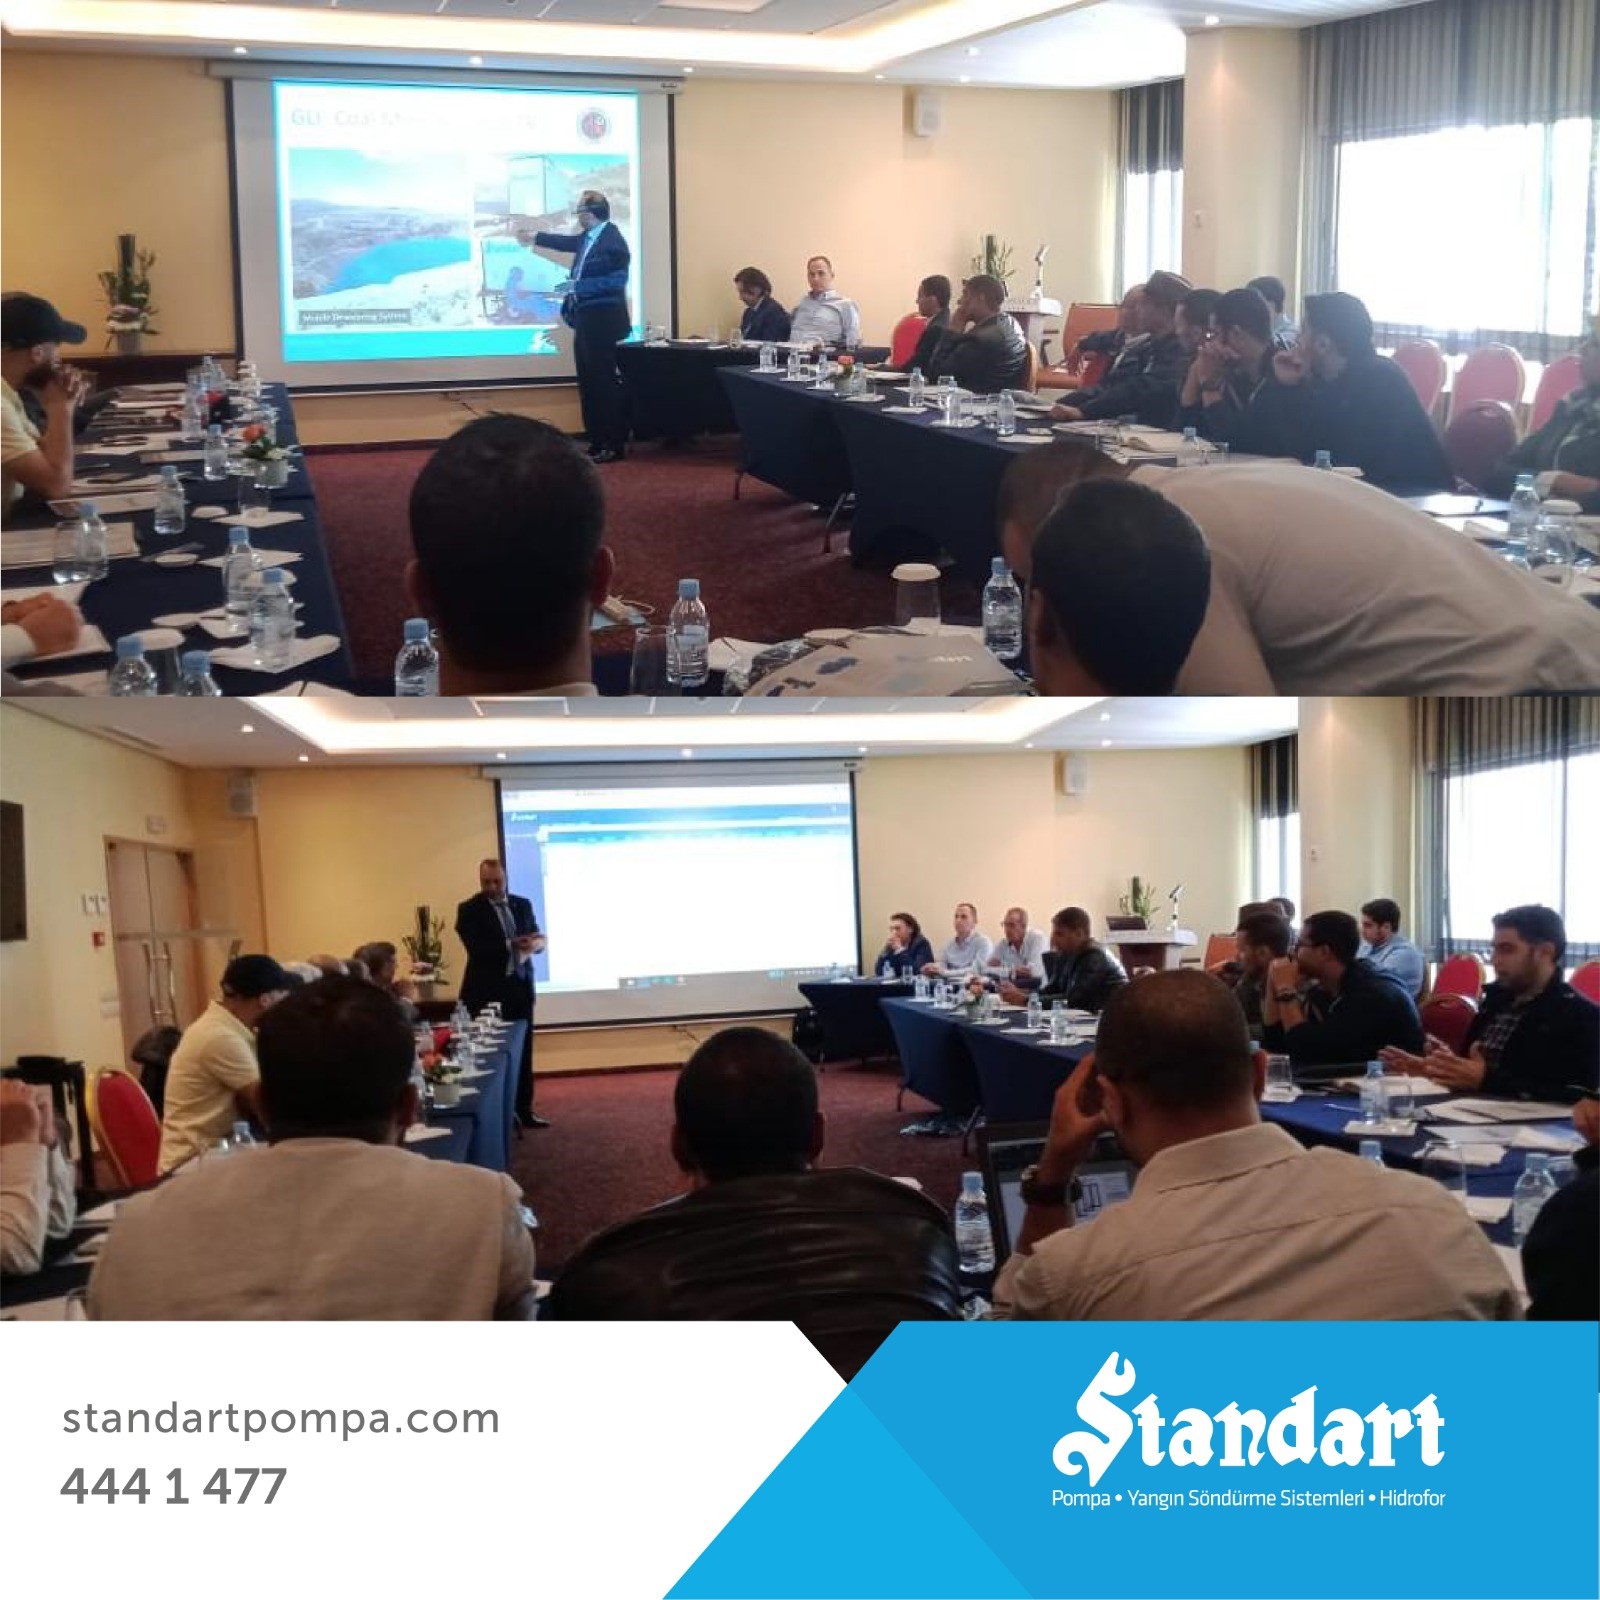 Standart Pompa met with the employees of the Directorate of Water at a meeting held in Casablanca, Morocco.